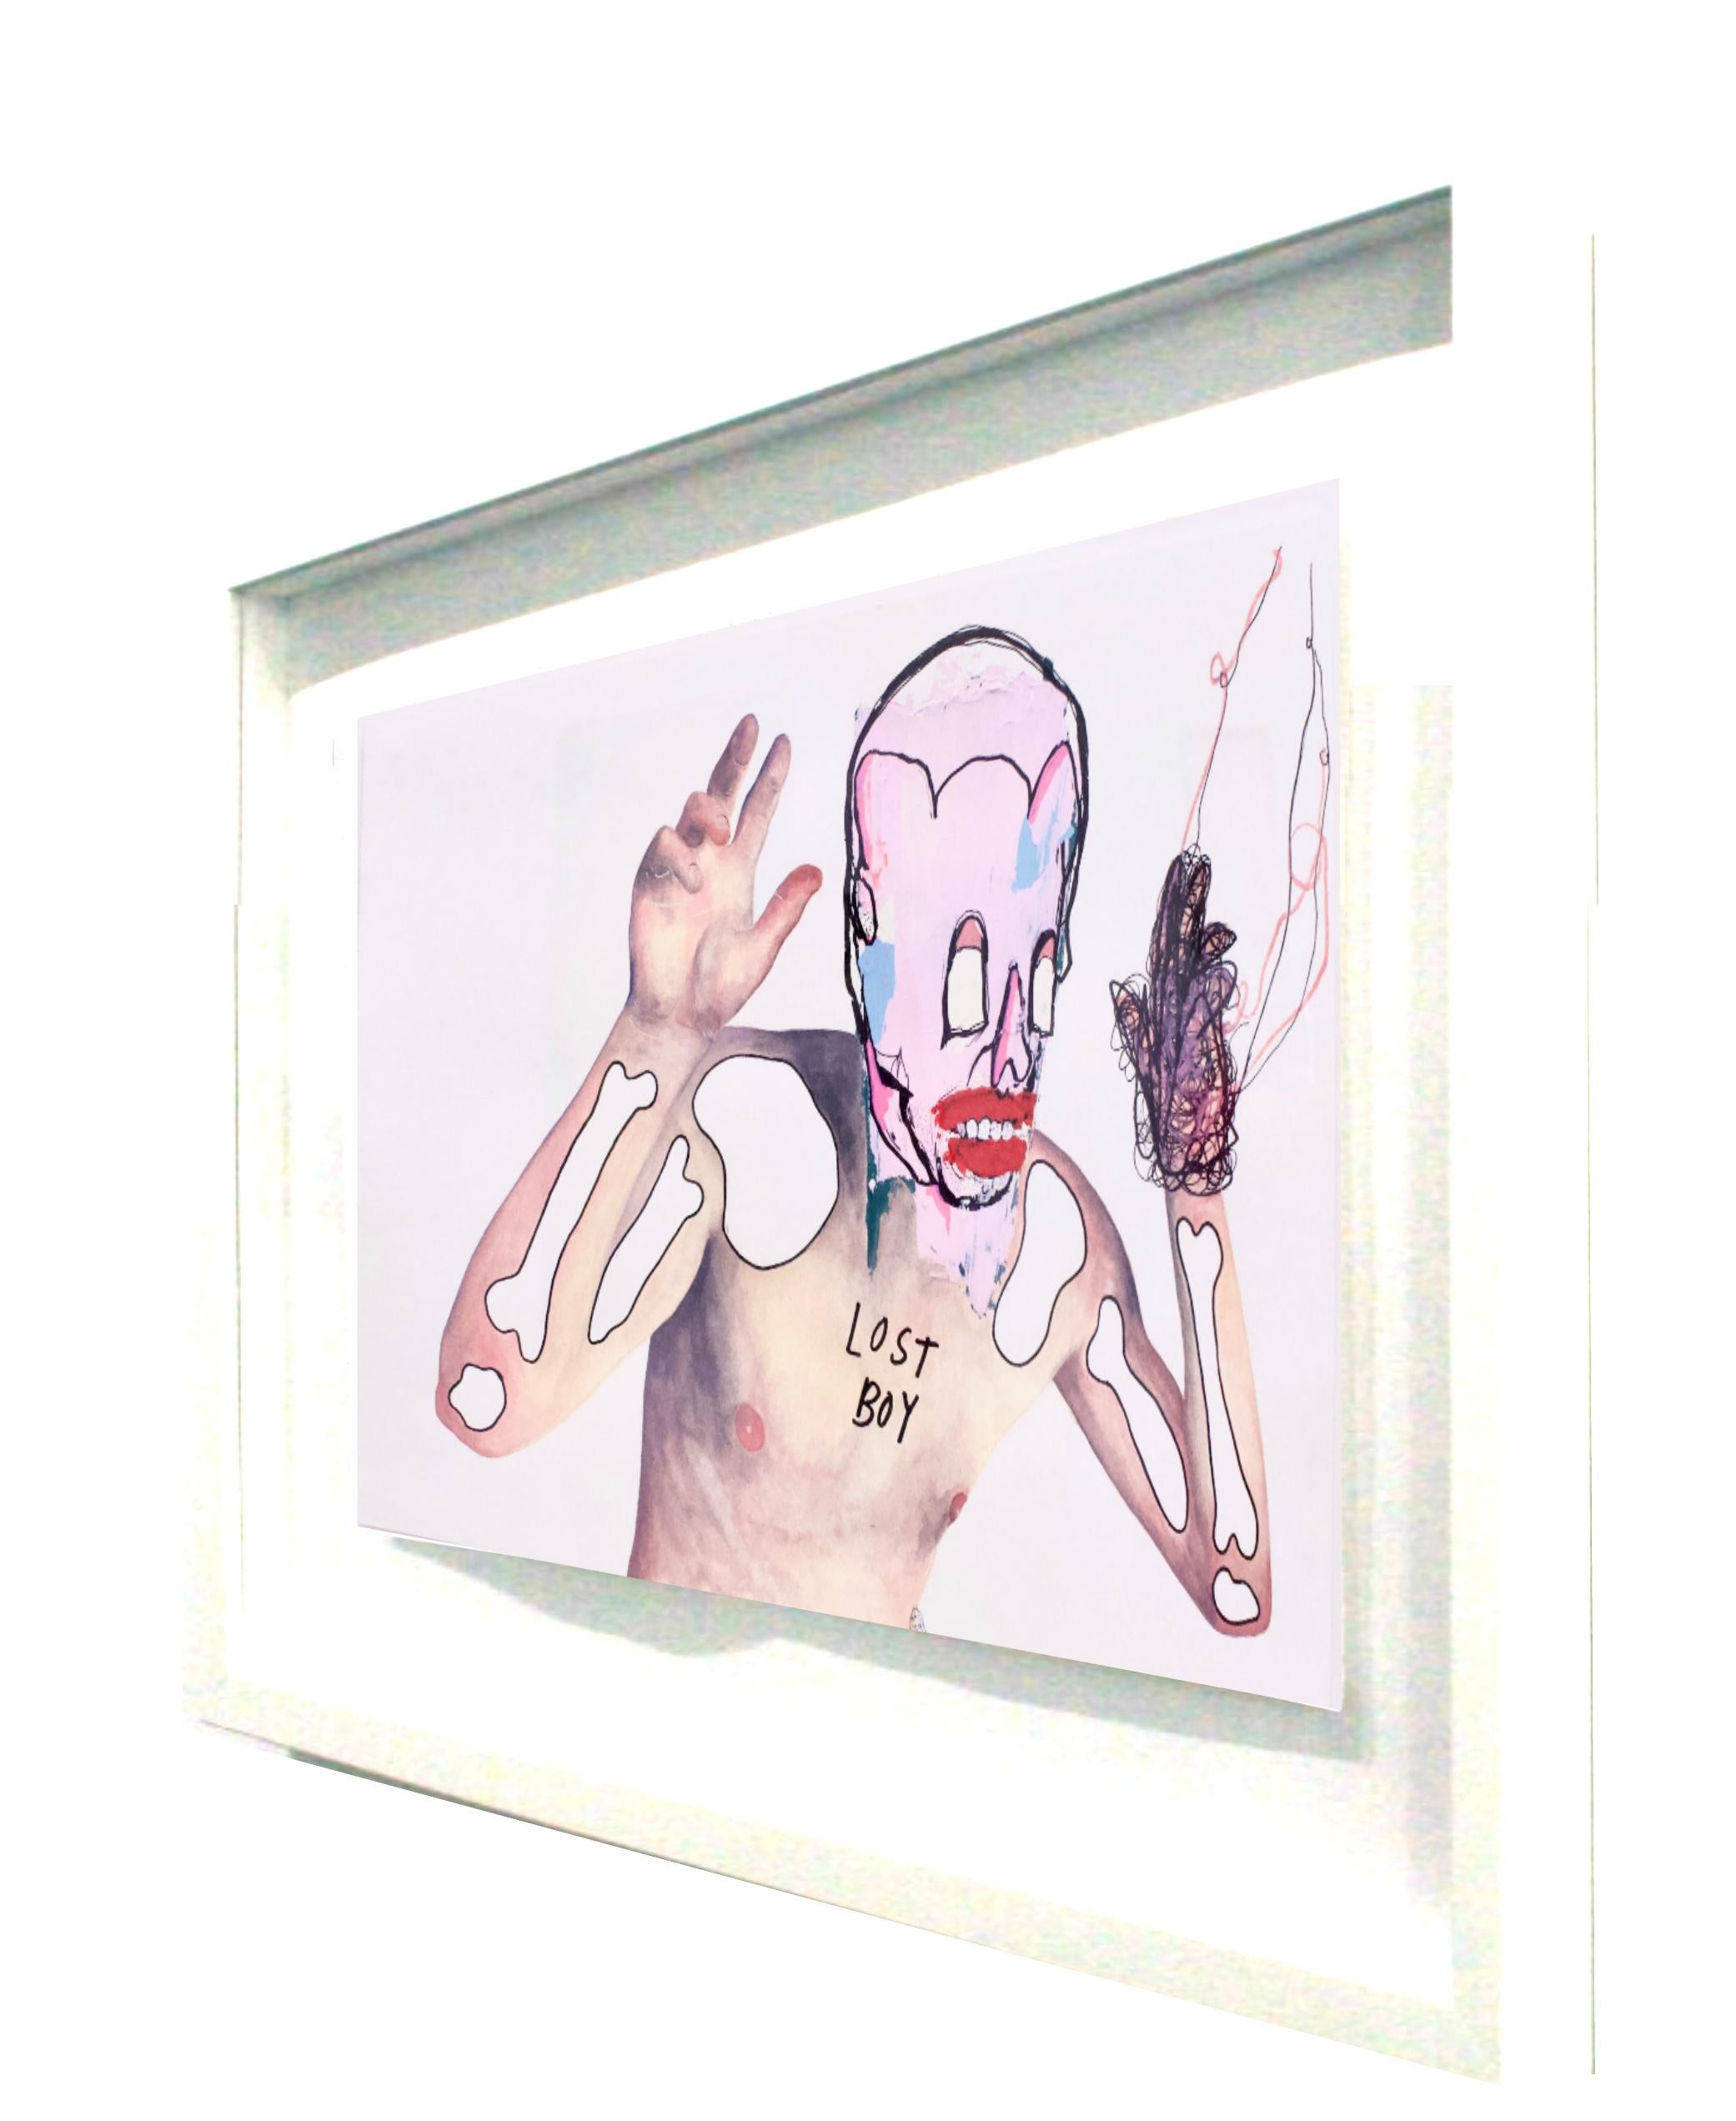 Lost Boy - original framed work on paper by Theohuxxx For Sale 1